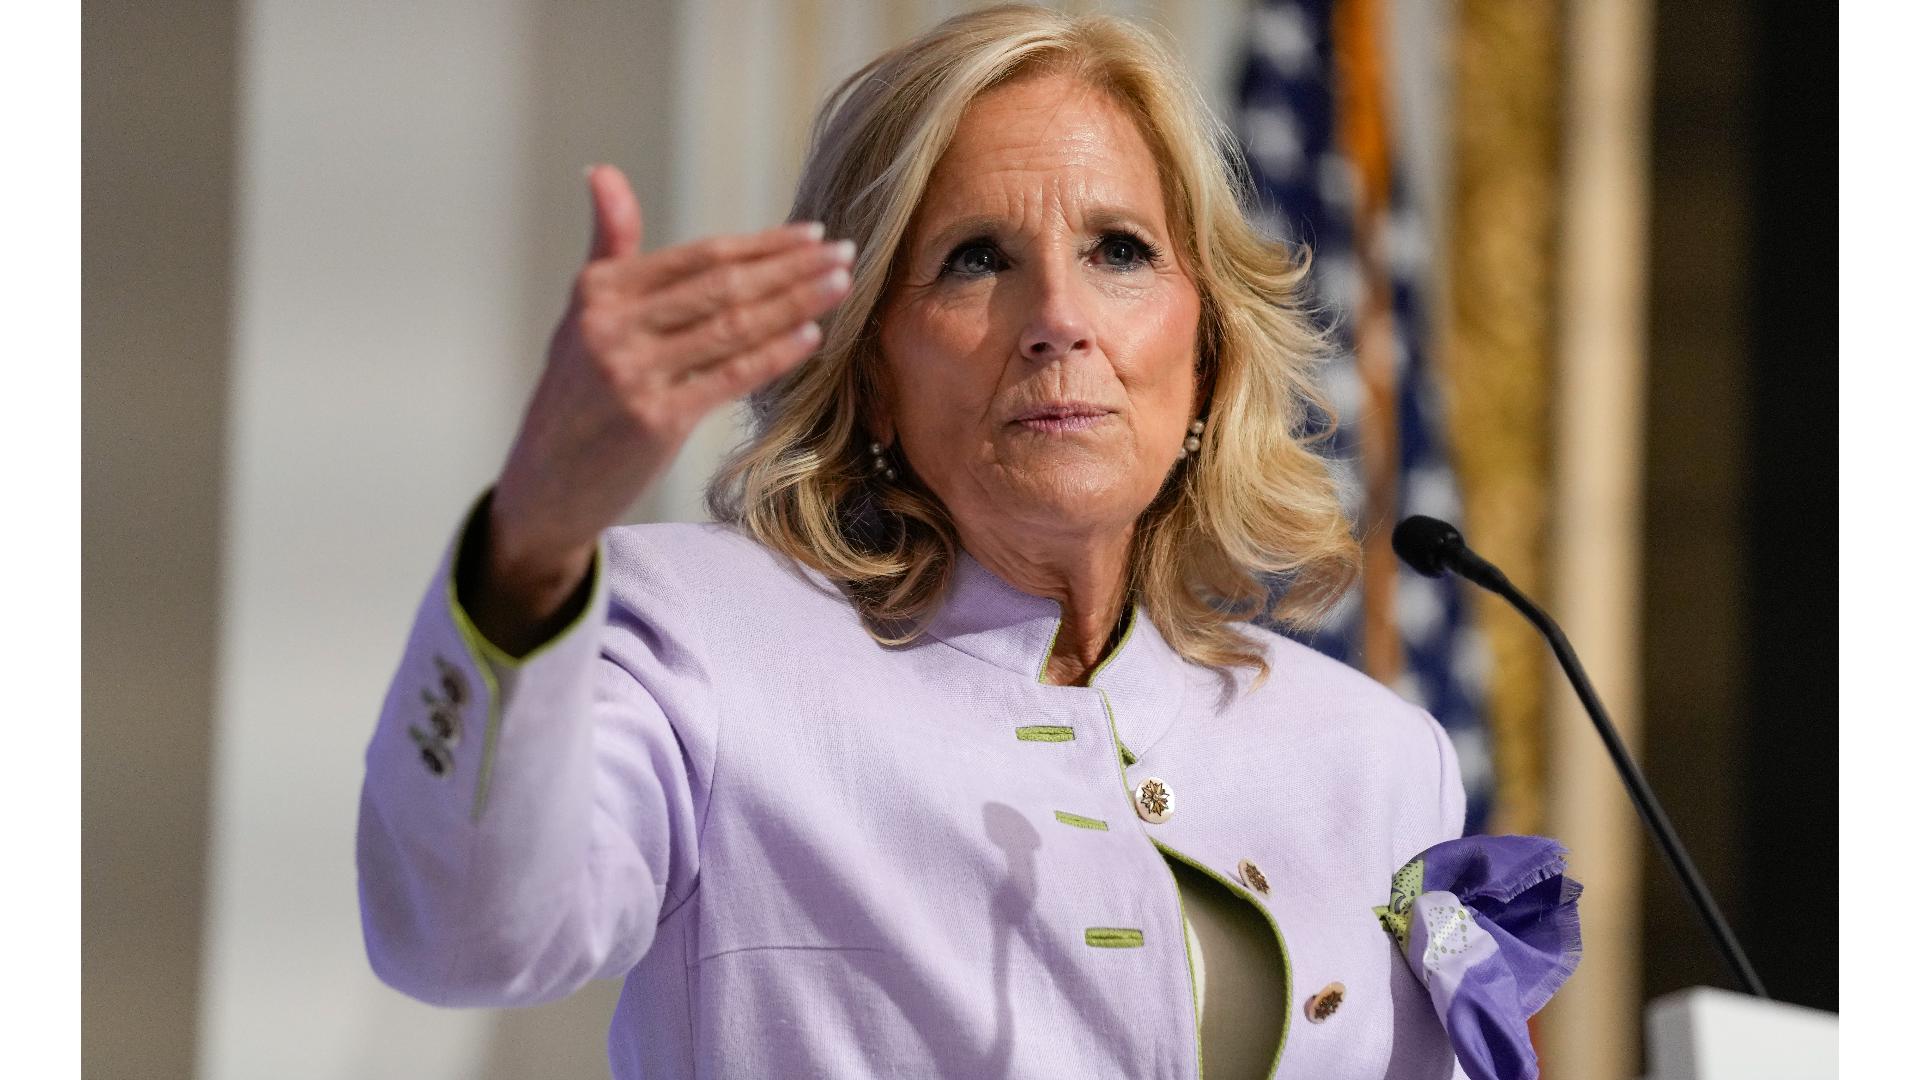 First Lady Jill Biden will be stopping in Portland this week during a whirlwind tour of three western states, the White House announced Monday.